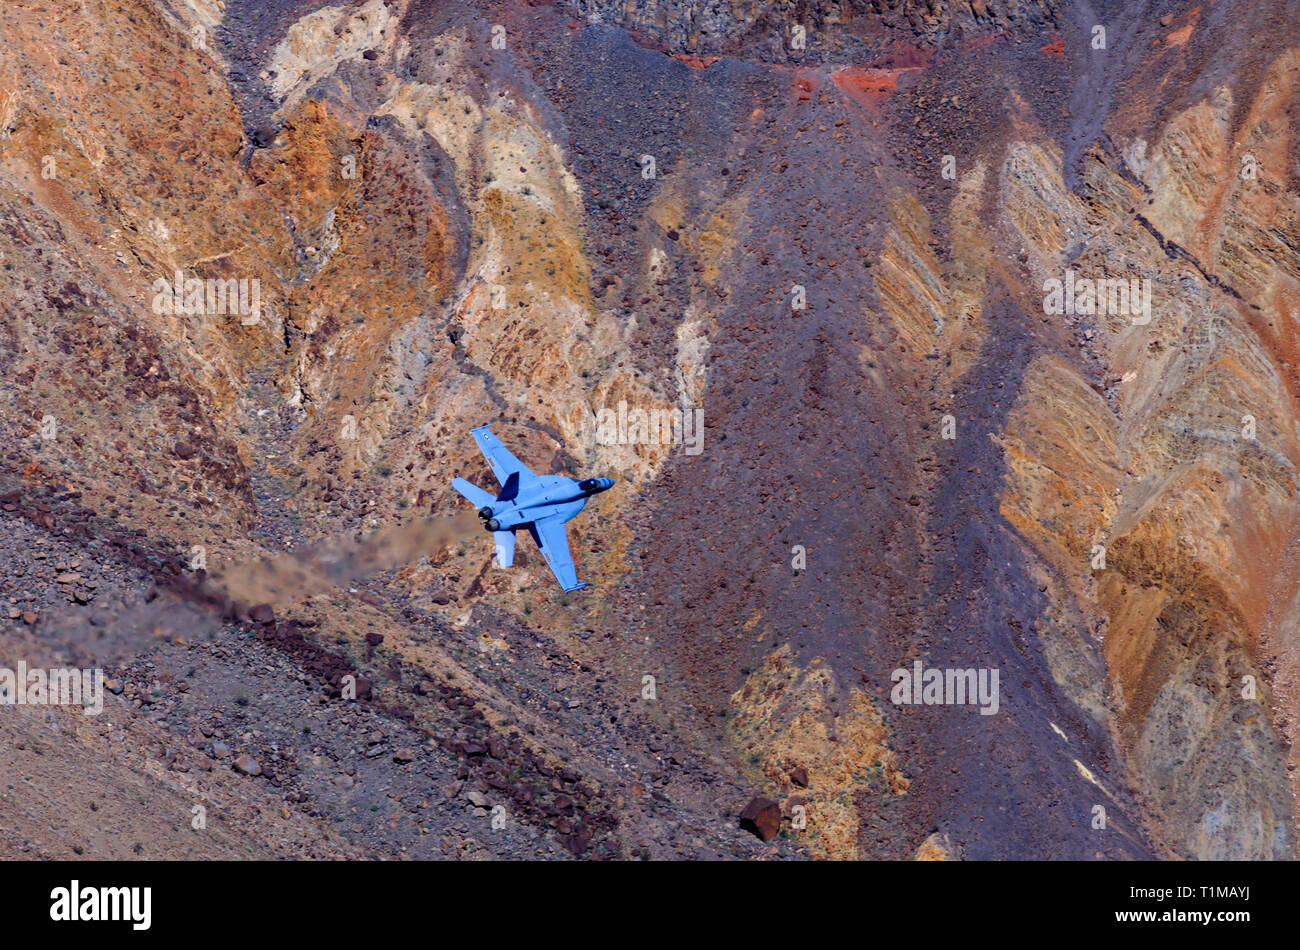 In this shot a Boeing F/A-18E Super Hornet makes a run down Rainbow/Star Wars Canyon in Death Valley National Park, California, USA. Stock Photo